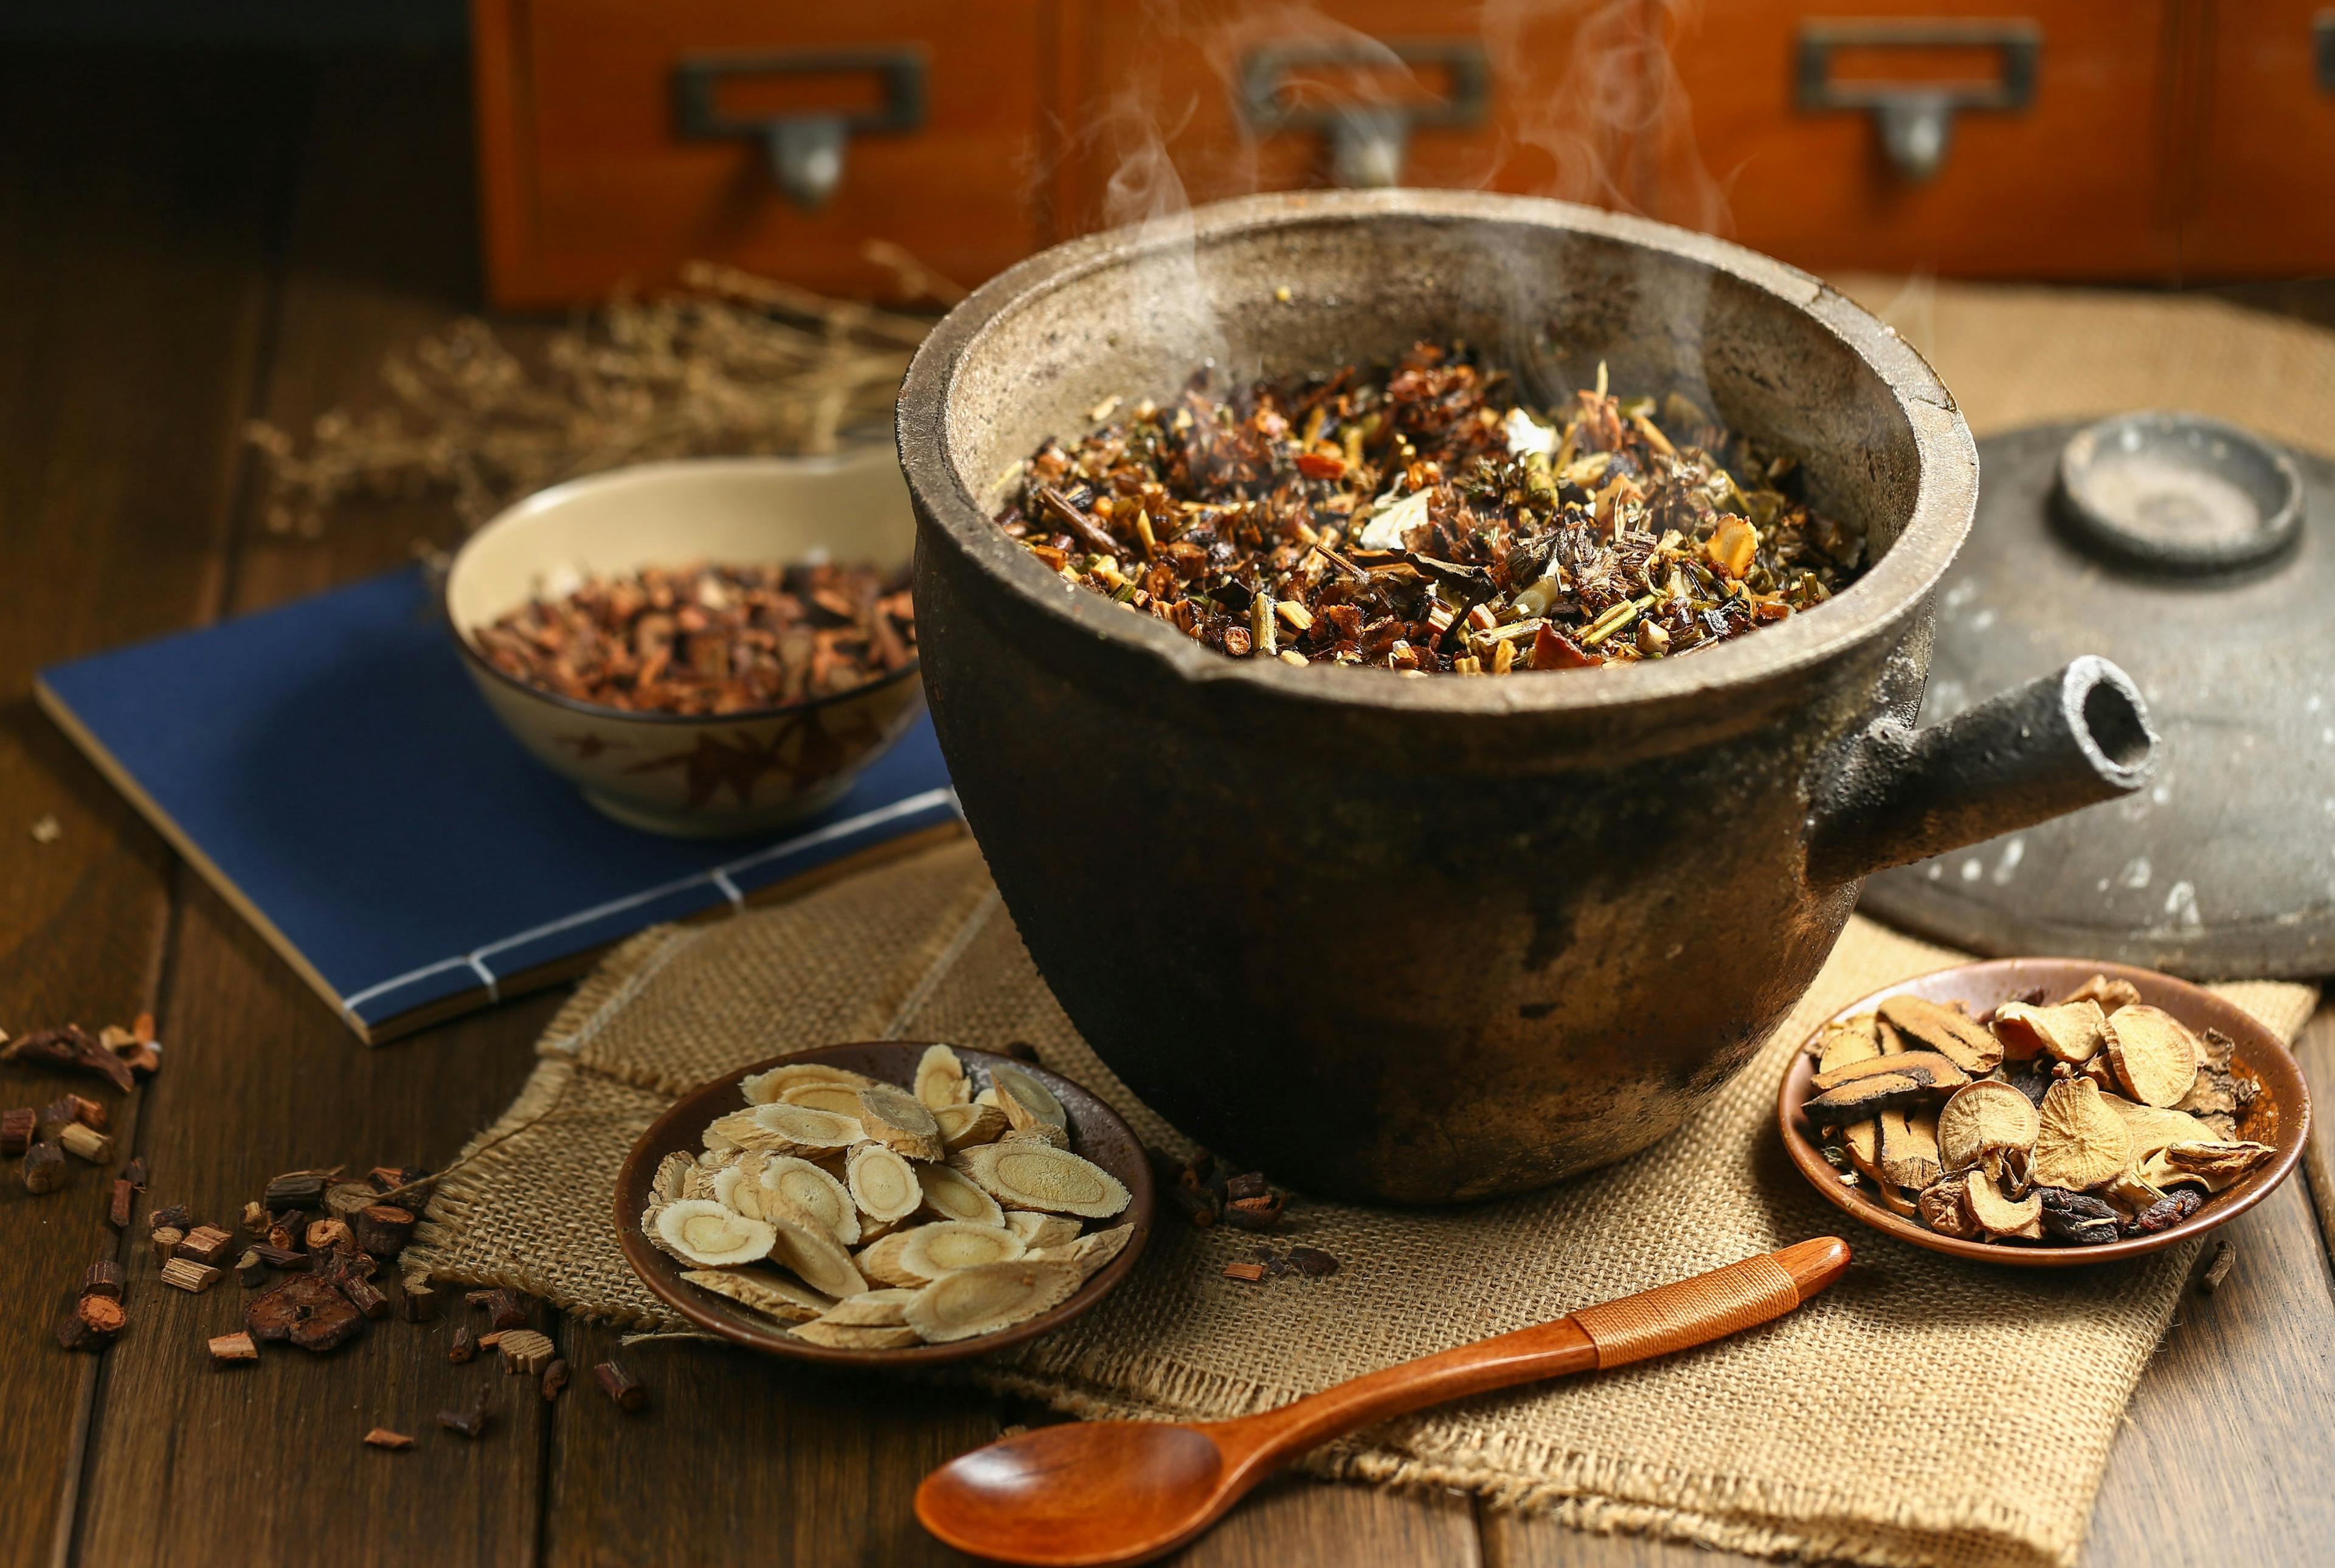 Chinese traditional herbal medicine in casserole | Image Credit: © xb100 - stock.adobe.com